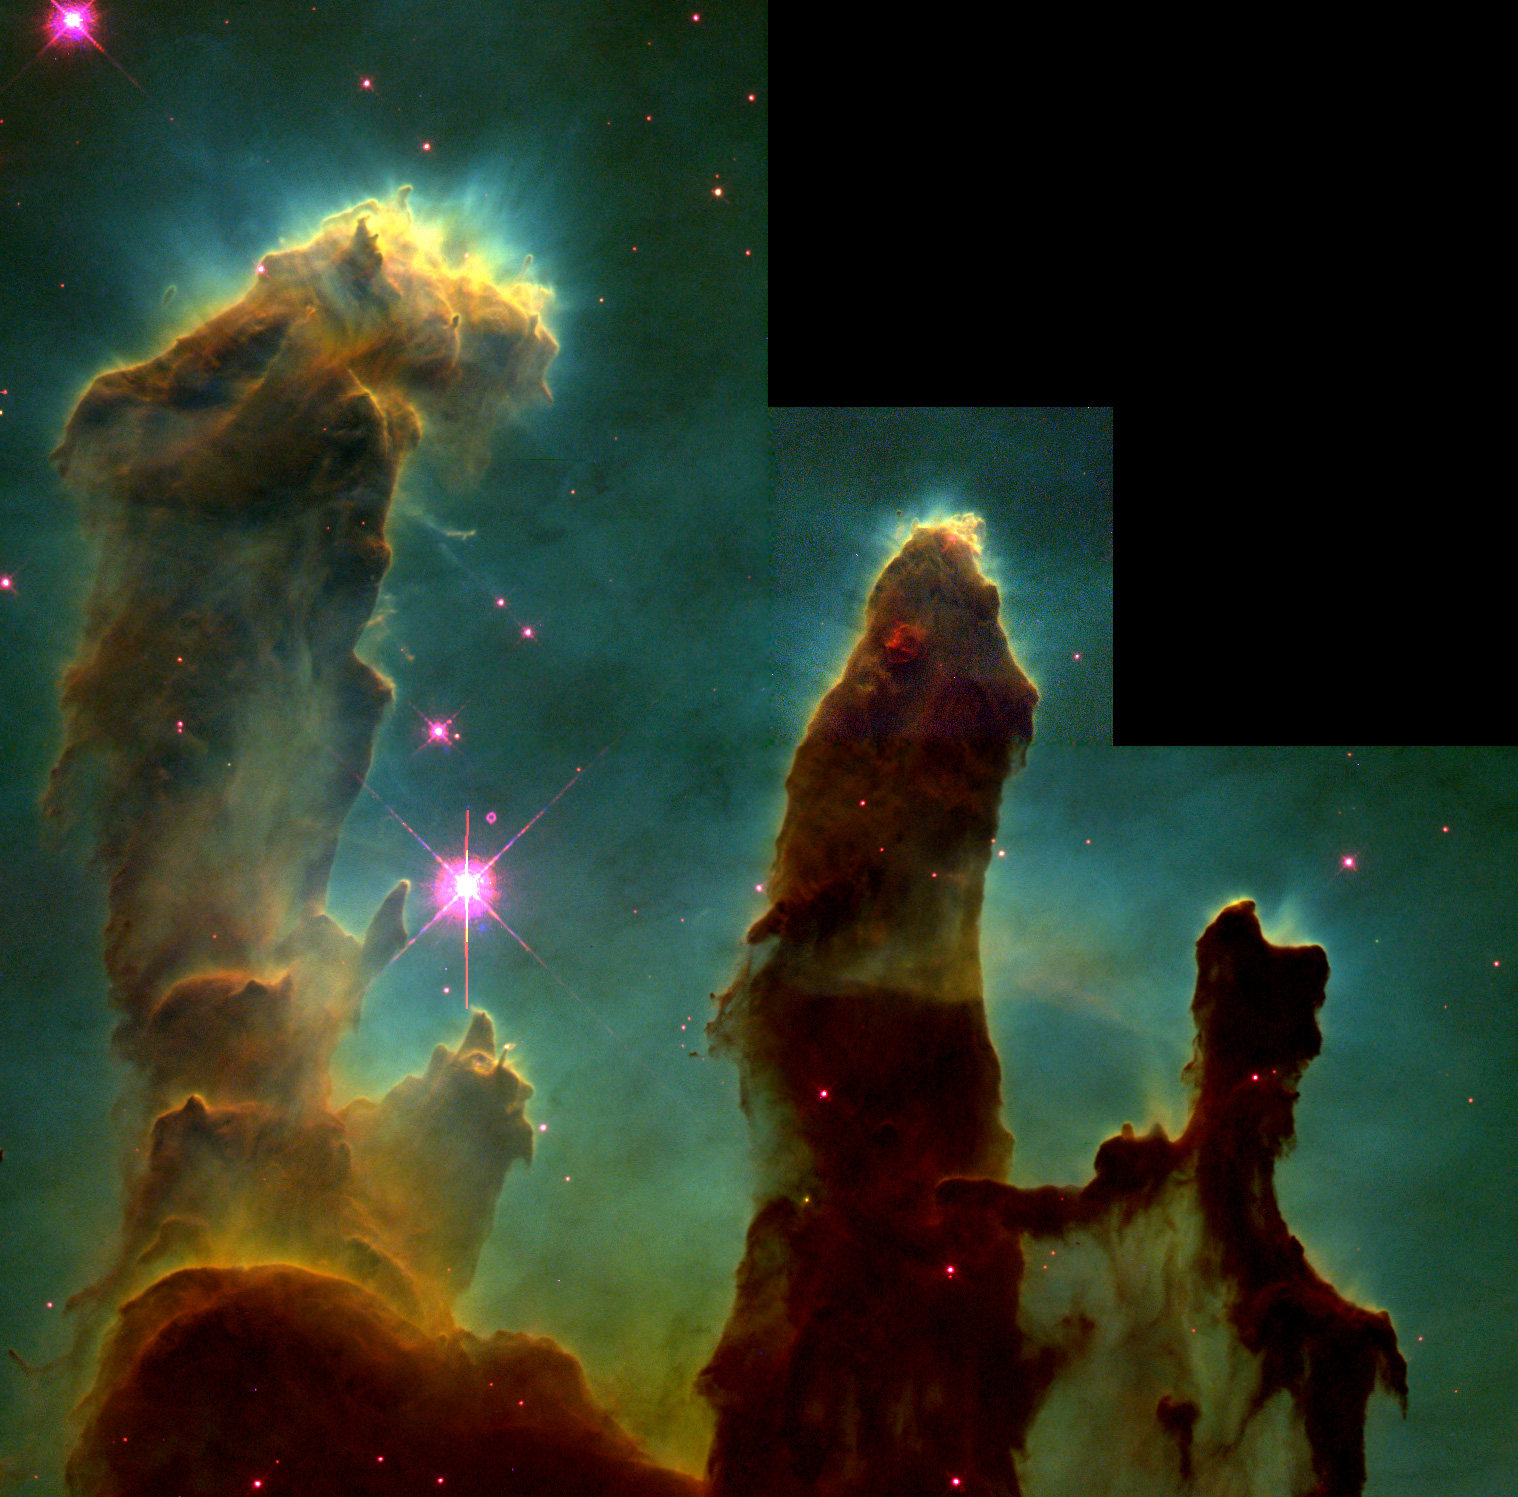 The Eagle Nebula Has Landed - And NGC 6611 Results